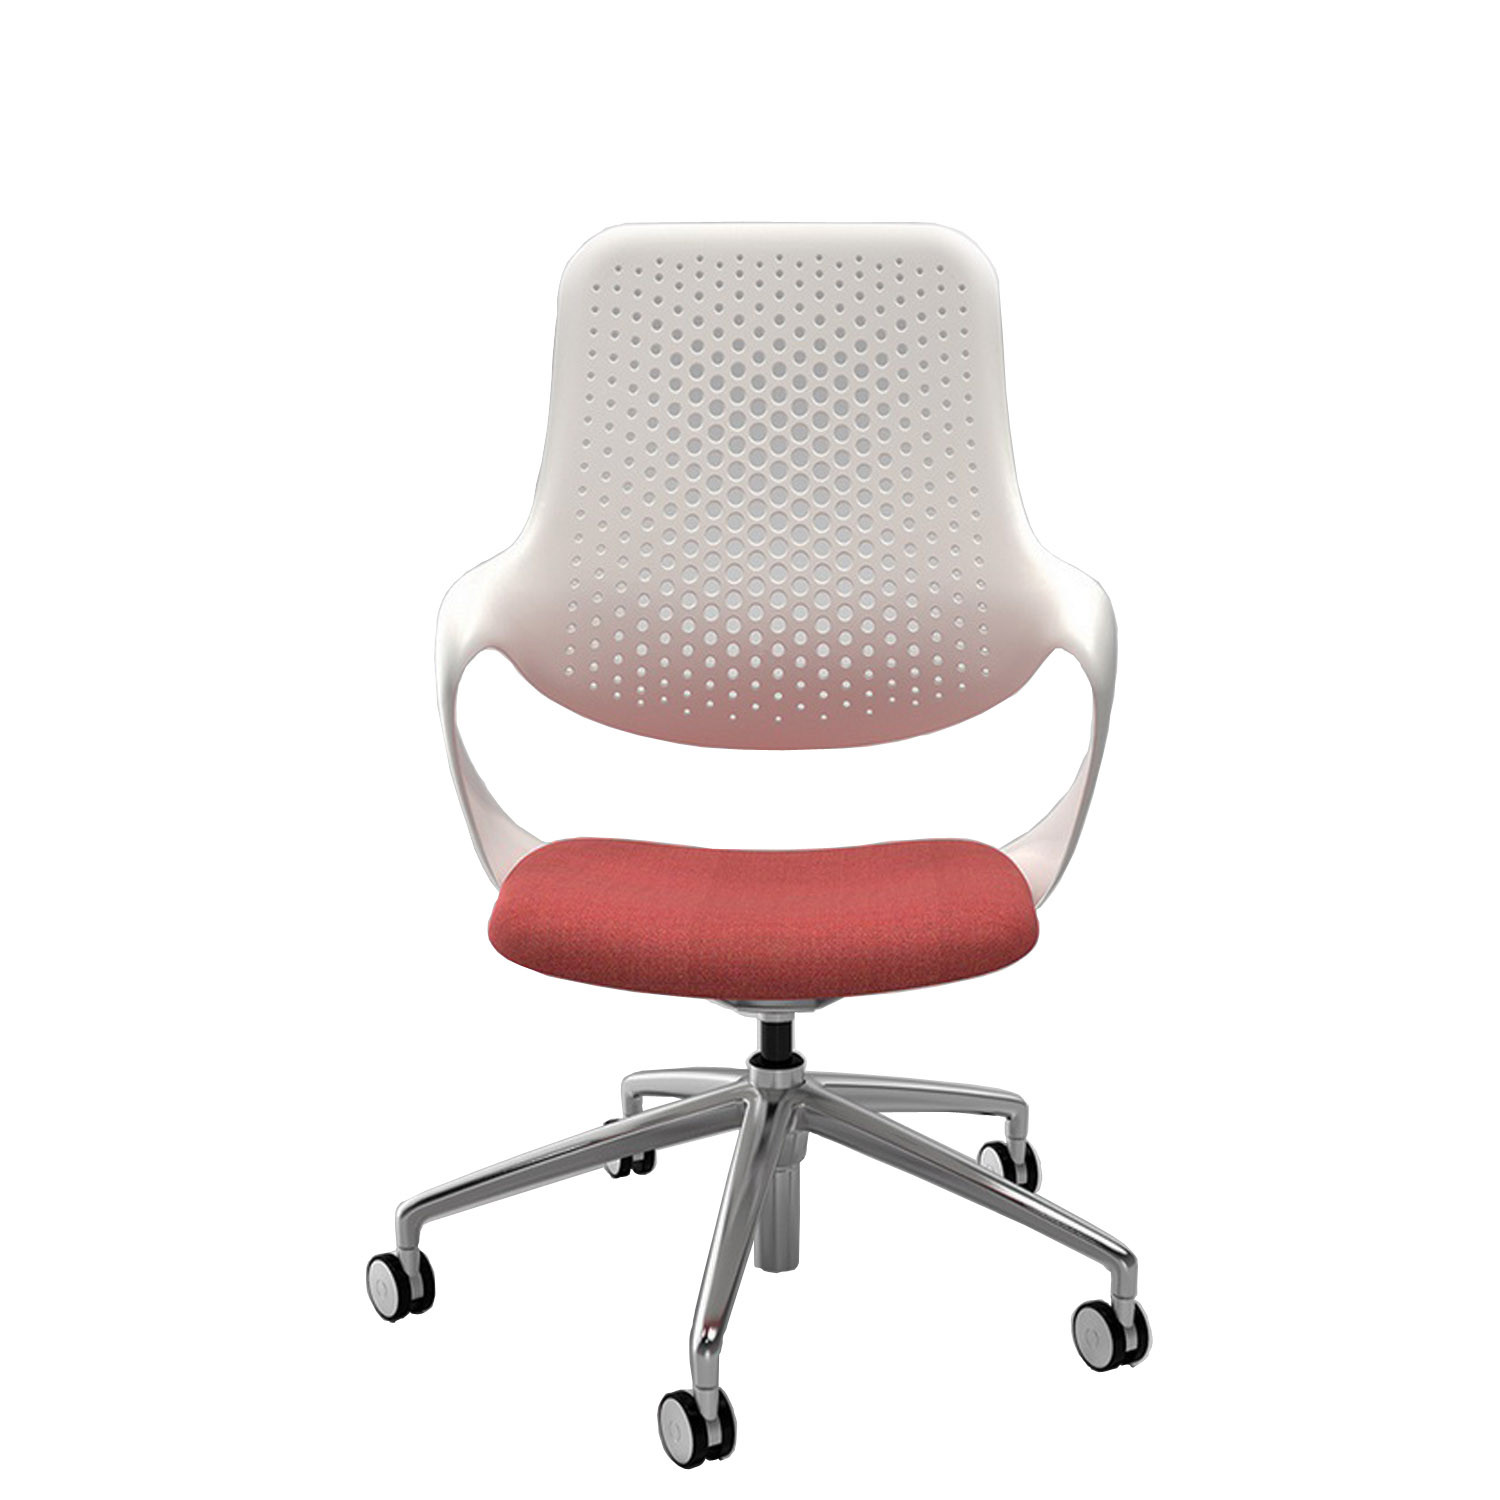 Coza Meeting Chair by Boss Design